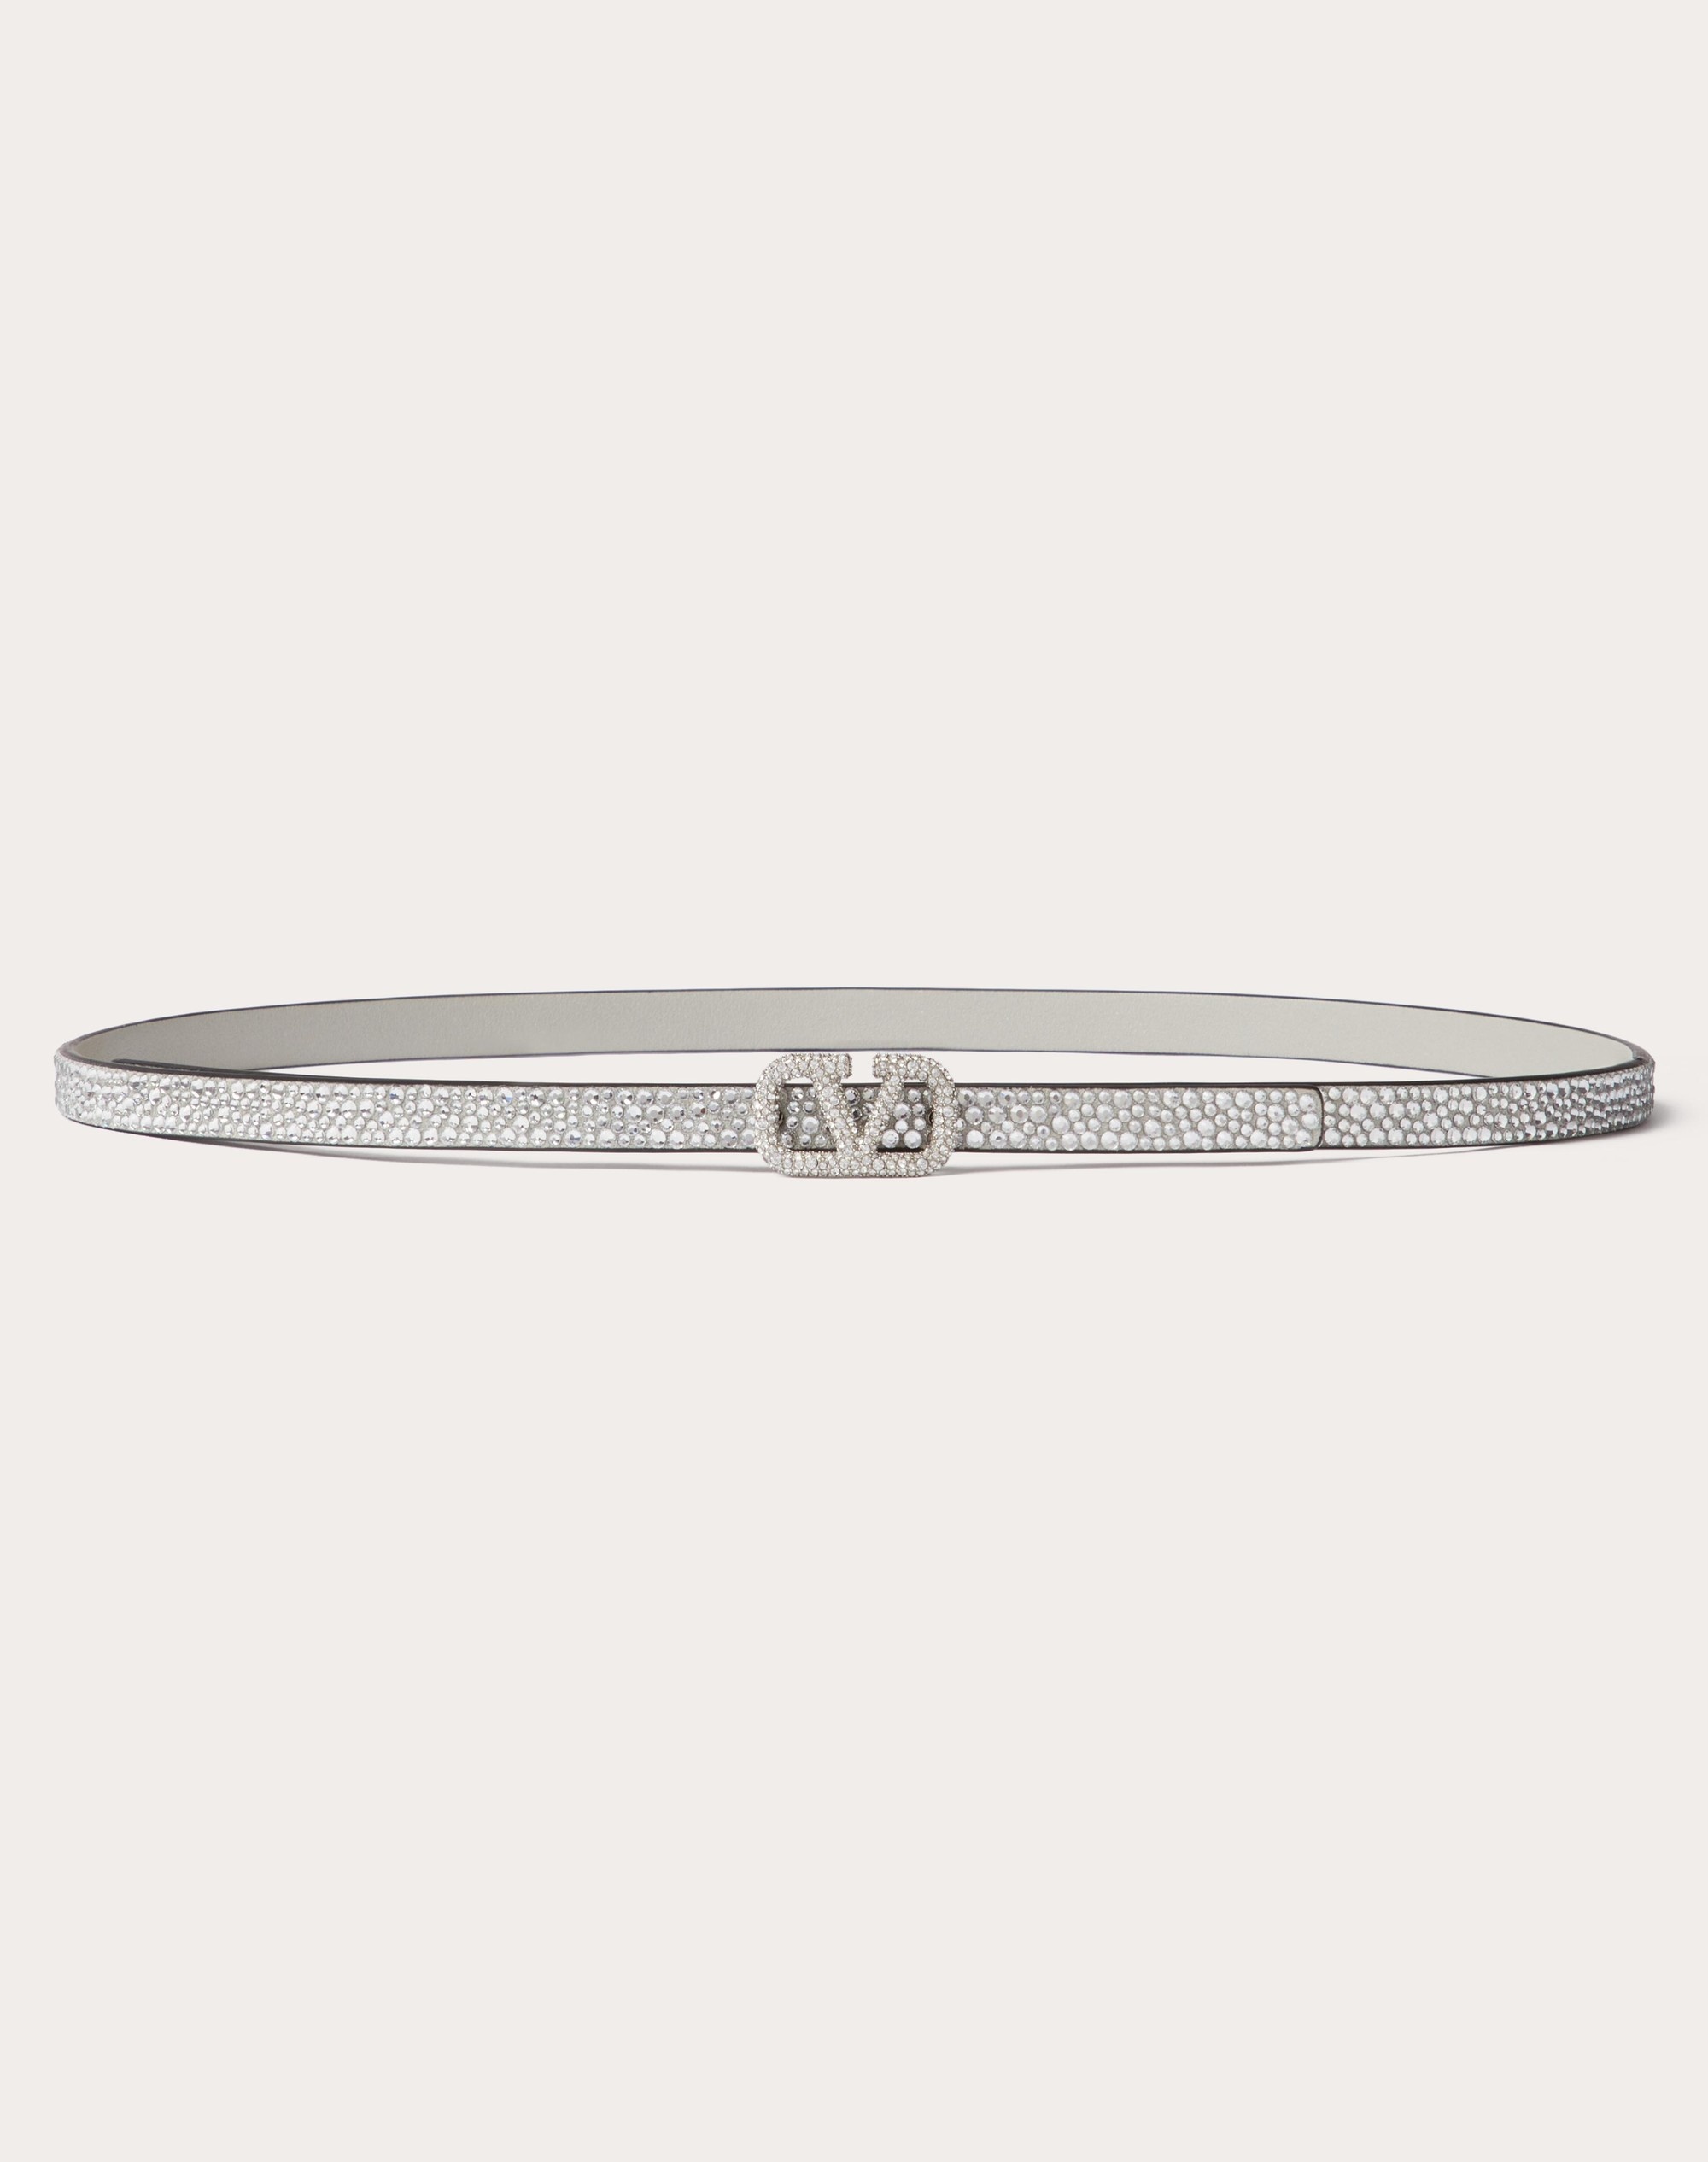 VLOGO SIGNATURE BELT WITH CRYSTALS 10 MM - 1